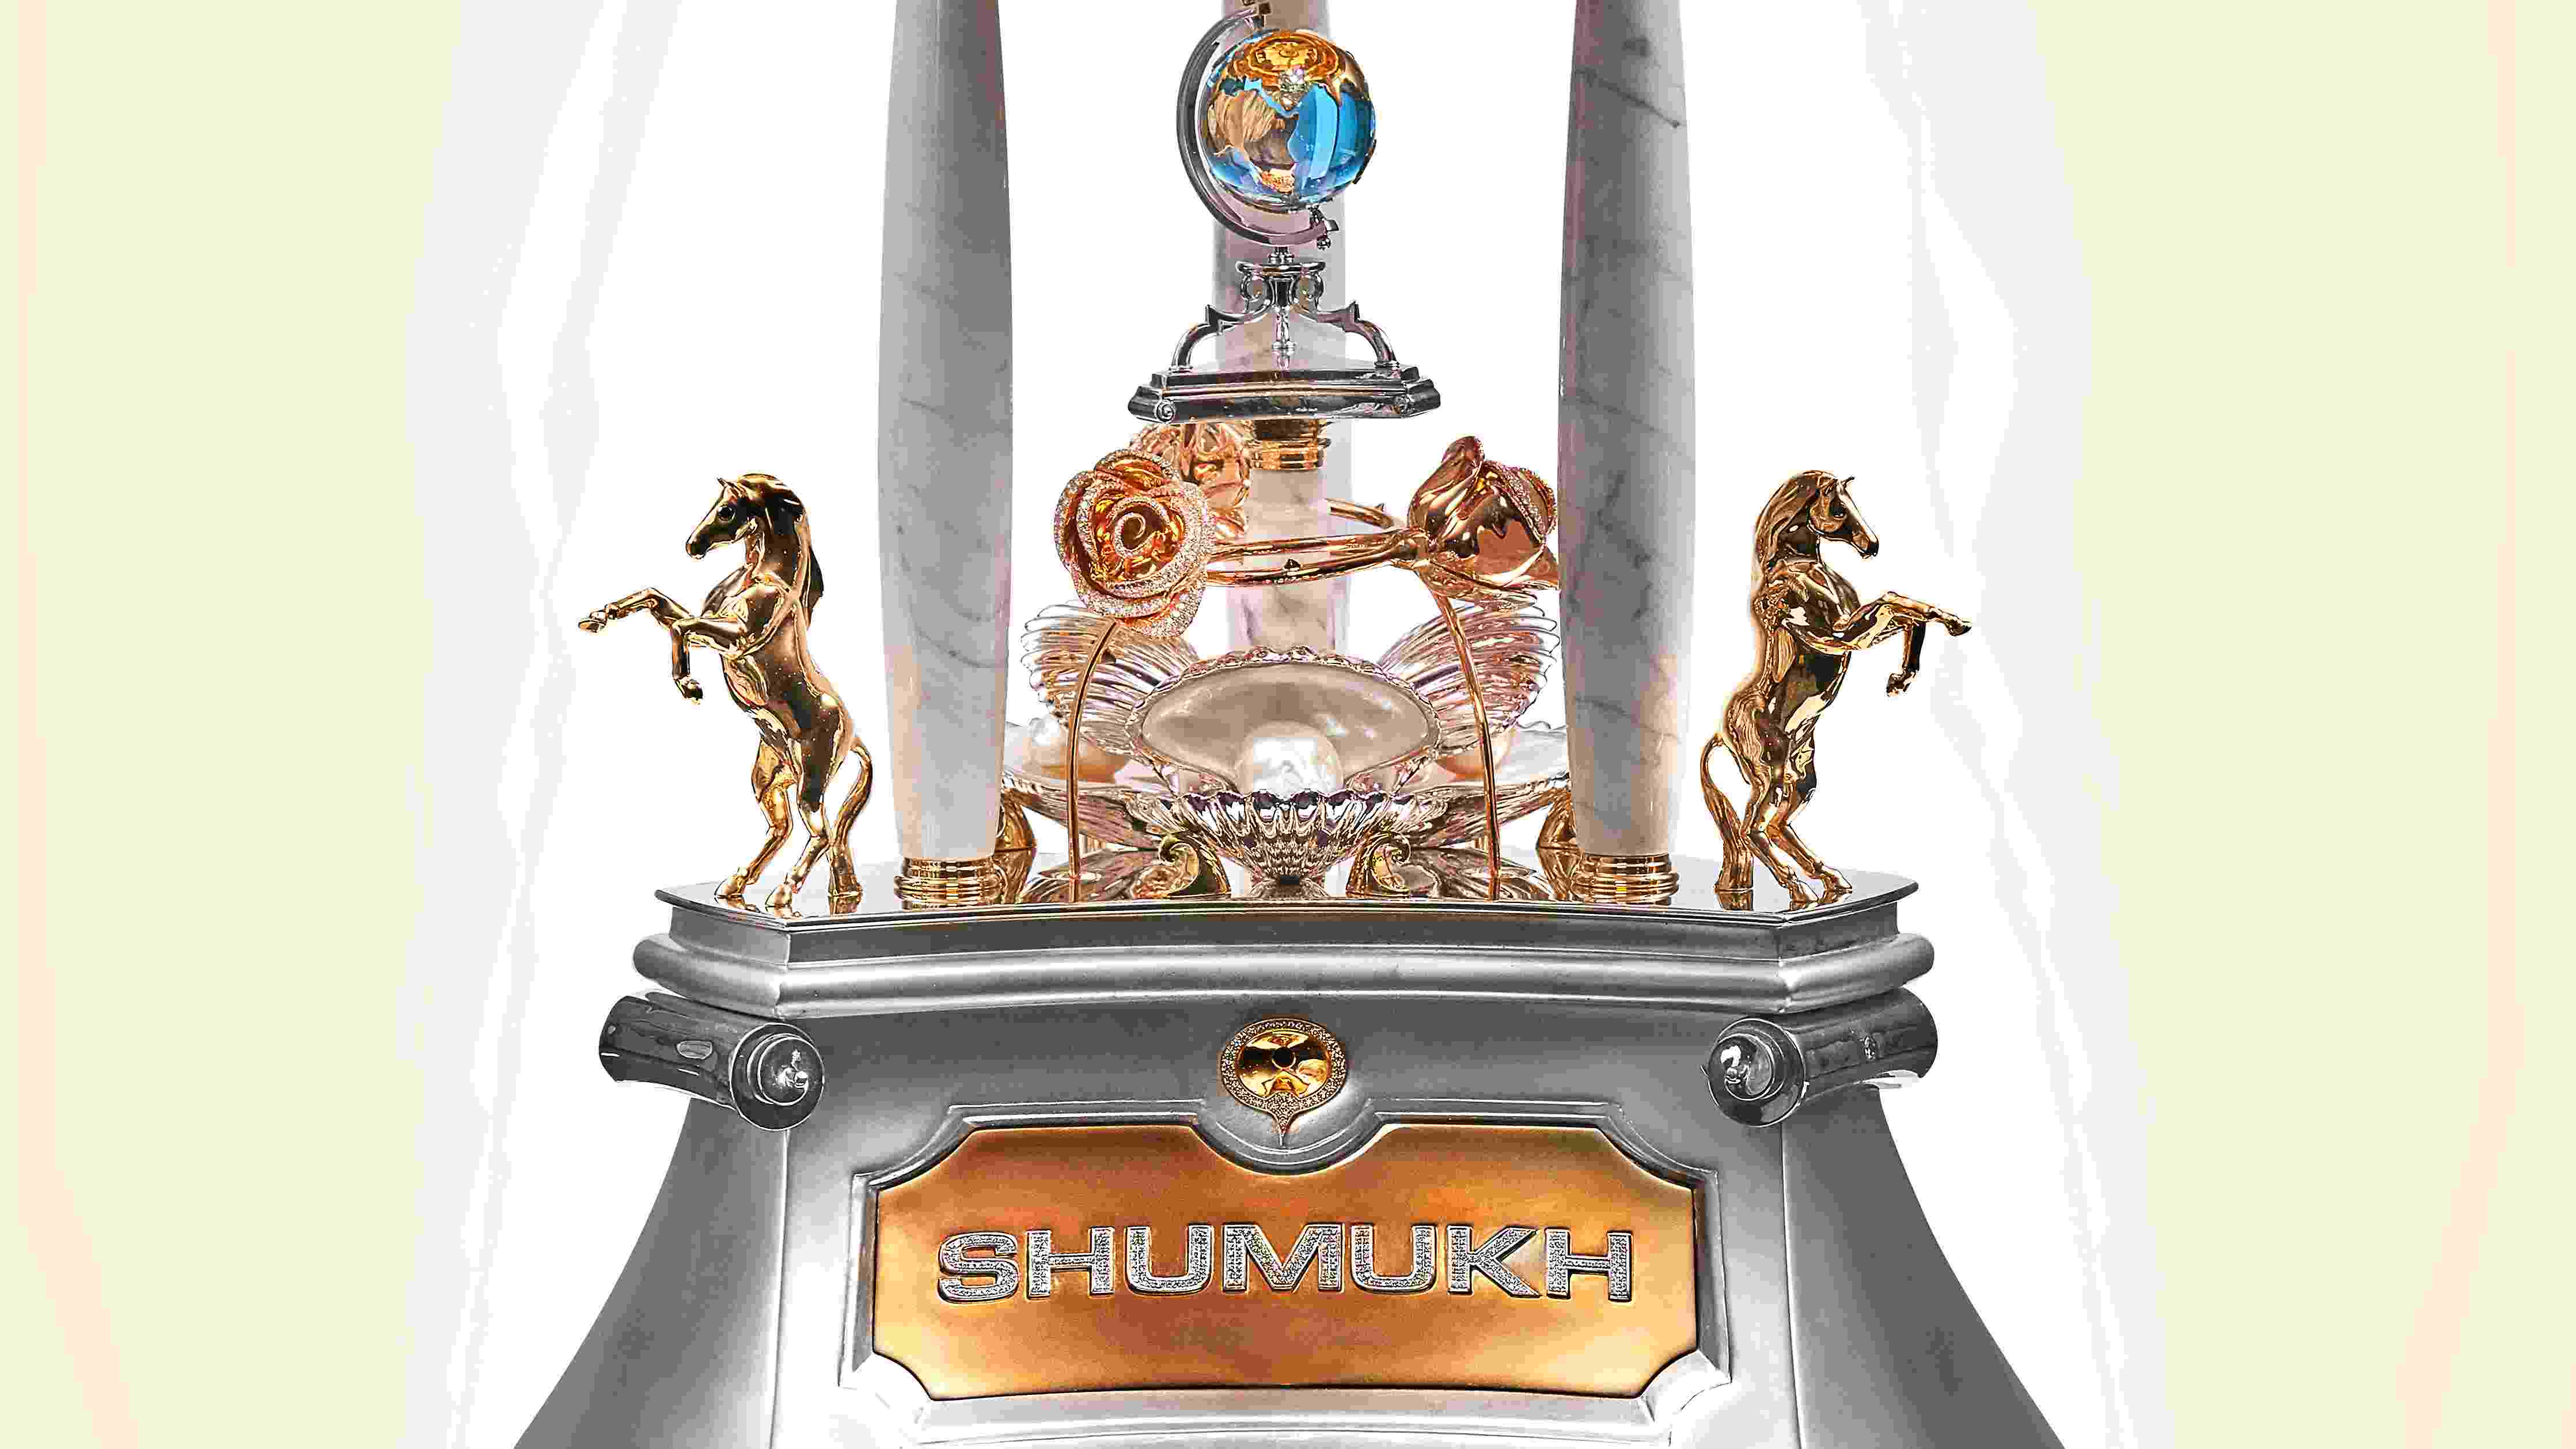 Shumukh, The Worlds Most Expensive Fragrance